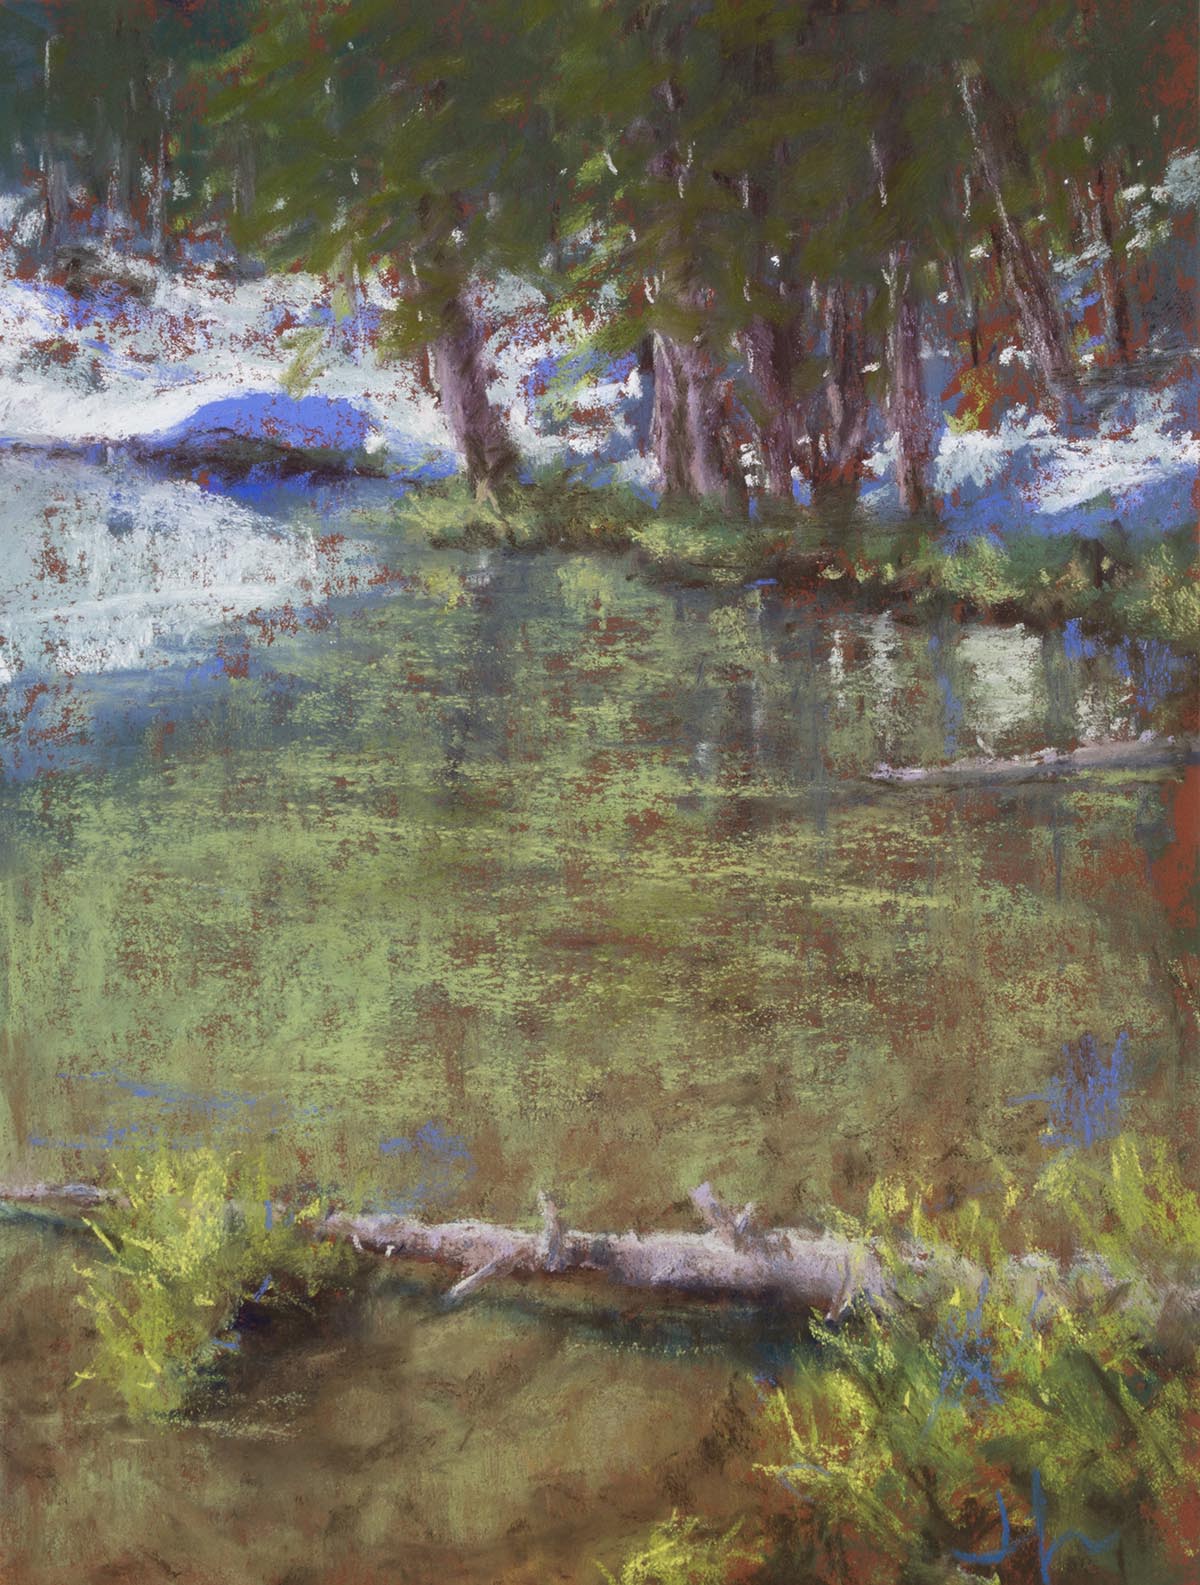 oil painting of trees and bushes reflecting in water